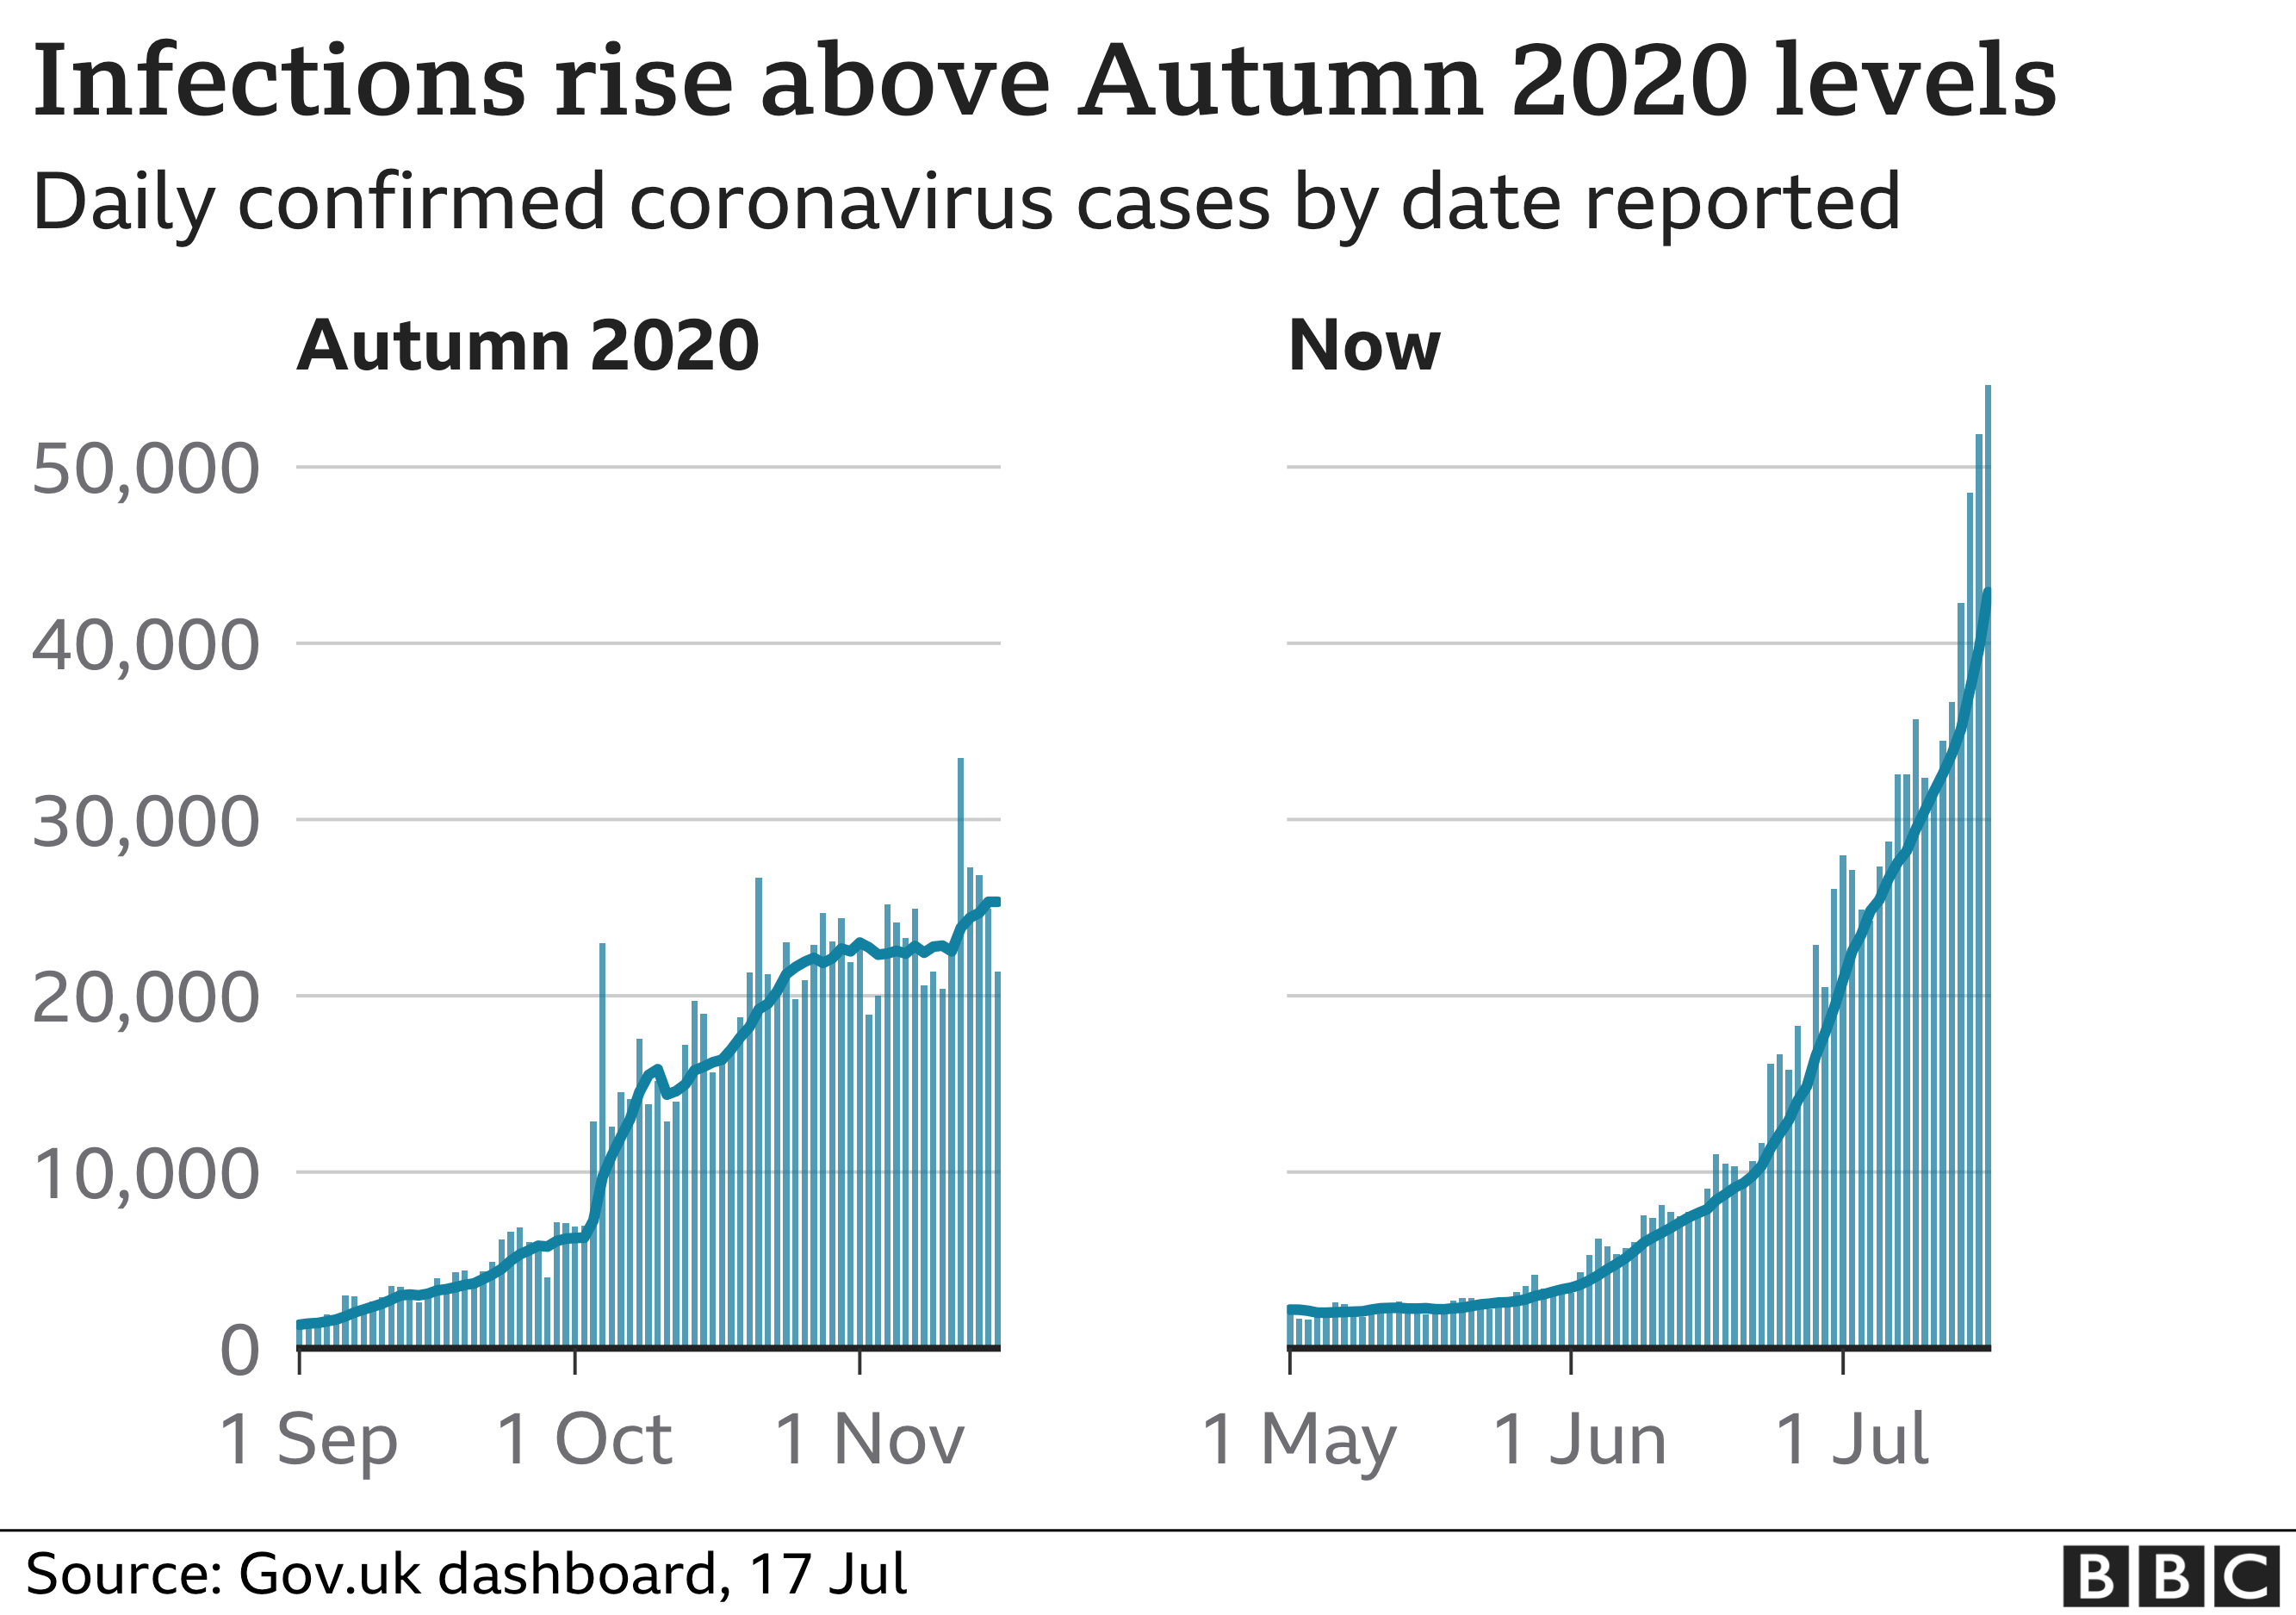 A graph showing infections have risen above autumn 2020 levels